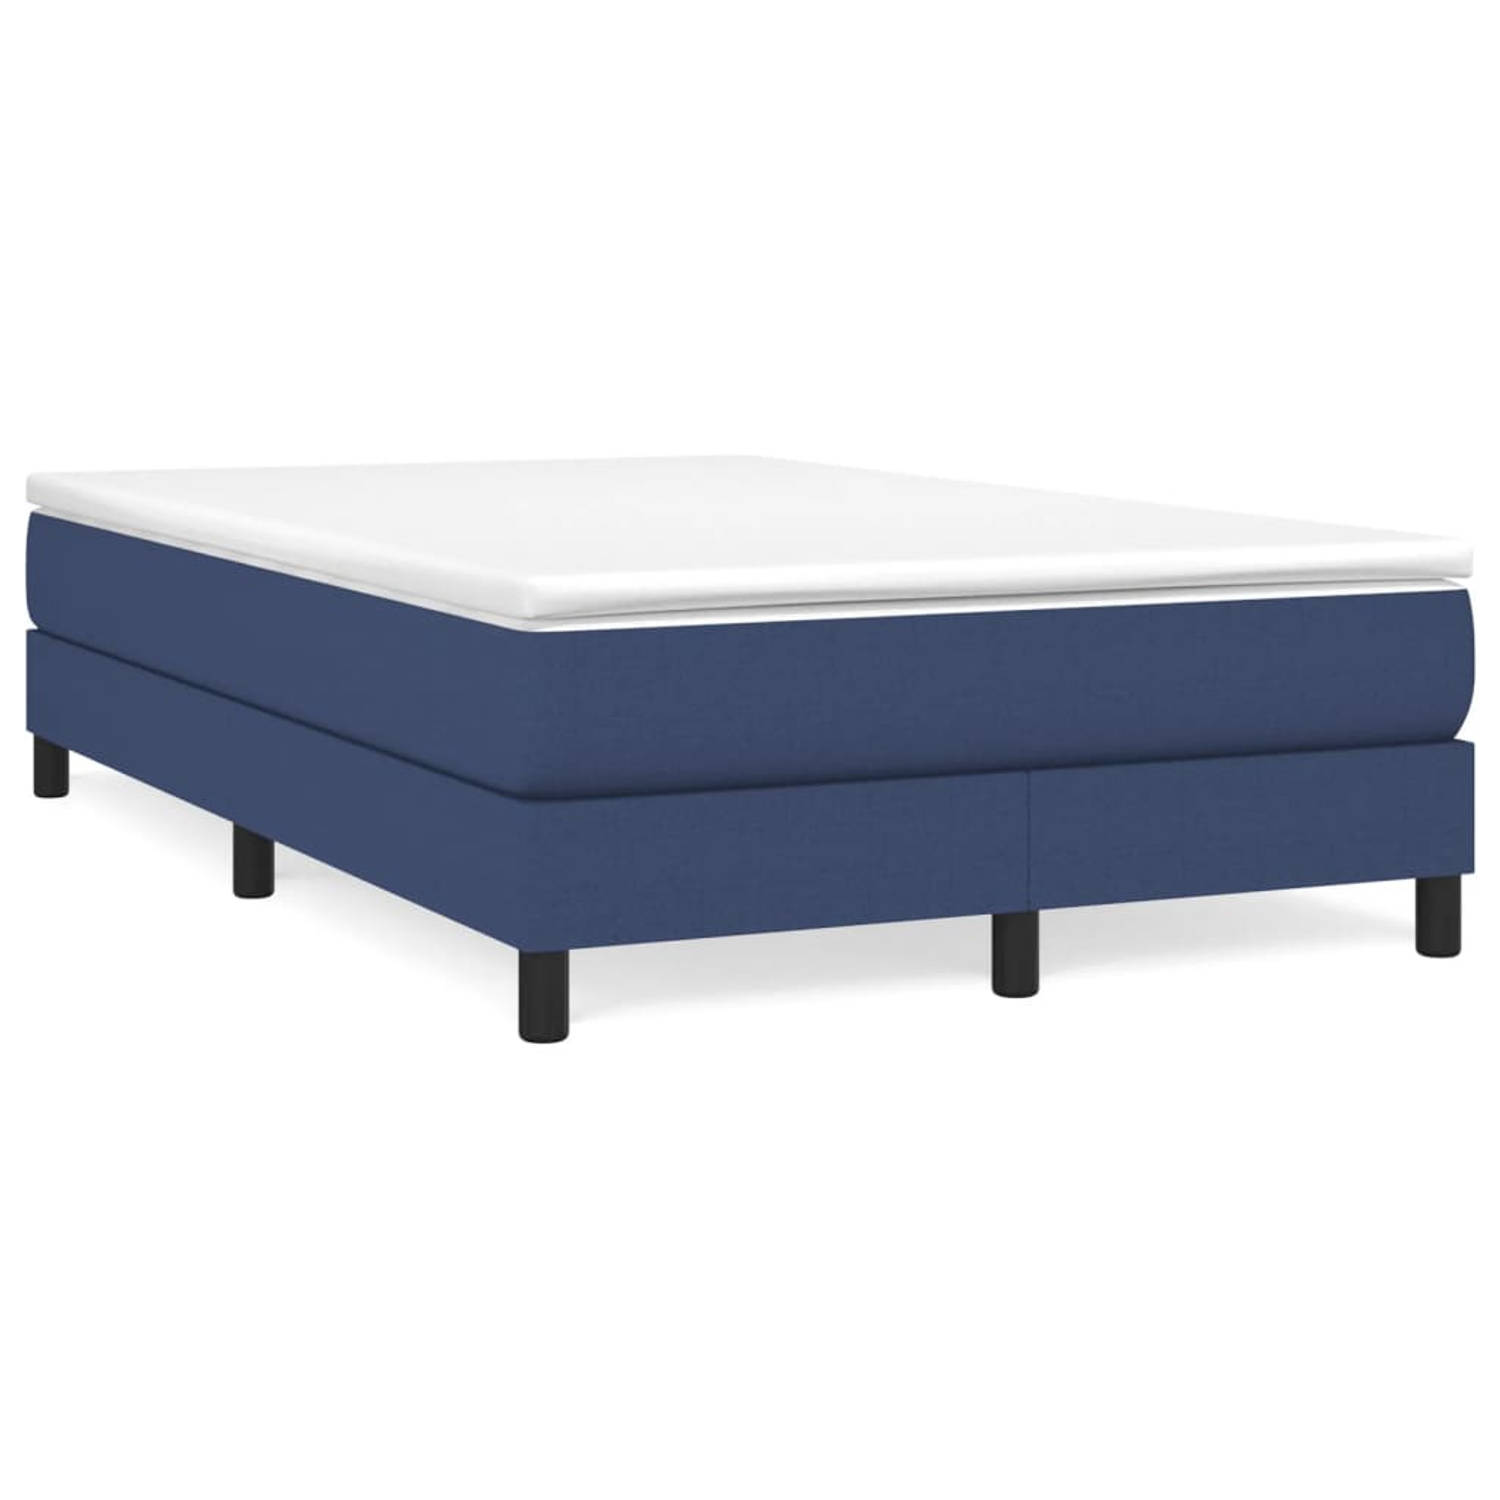 The Living Store Boxspringframe stof blauw 120x200 cm - Boxspringframe - Boxspringframes - Bed - Ledikant - Slaapmeubel - Bedframe - Bedbodem - Tweepersoonsbed - Boxspring - Bedden